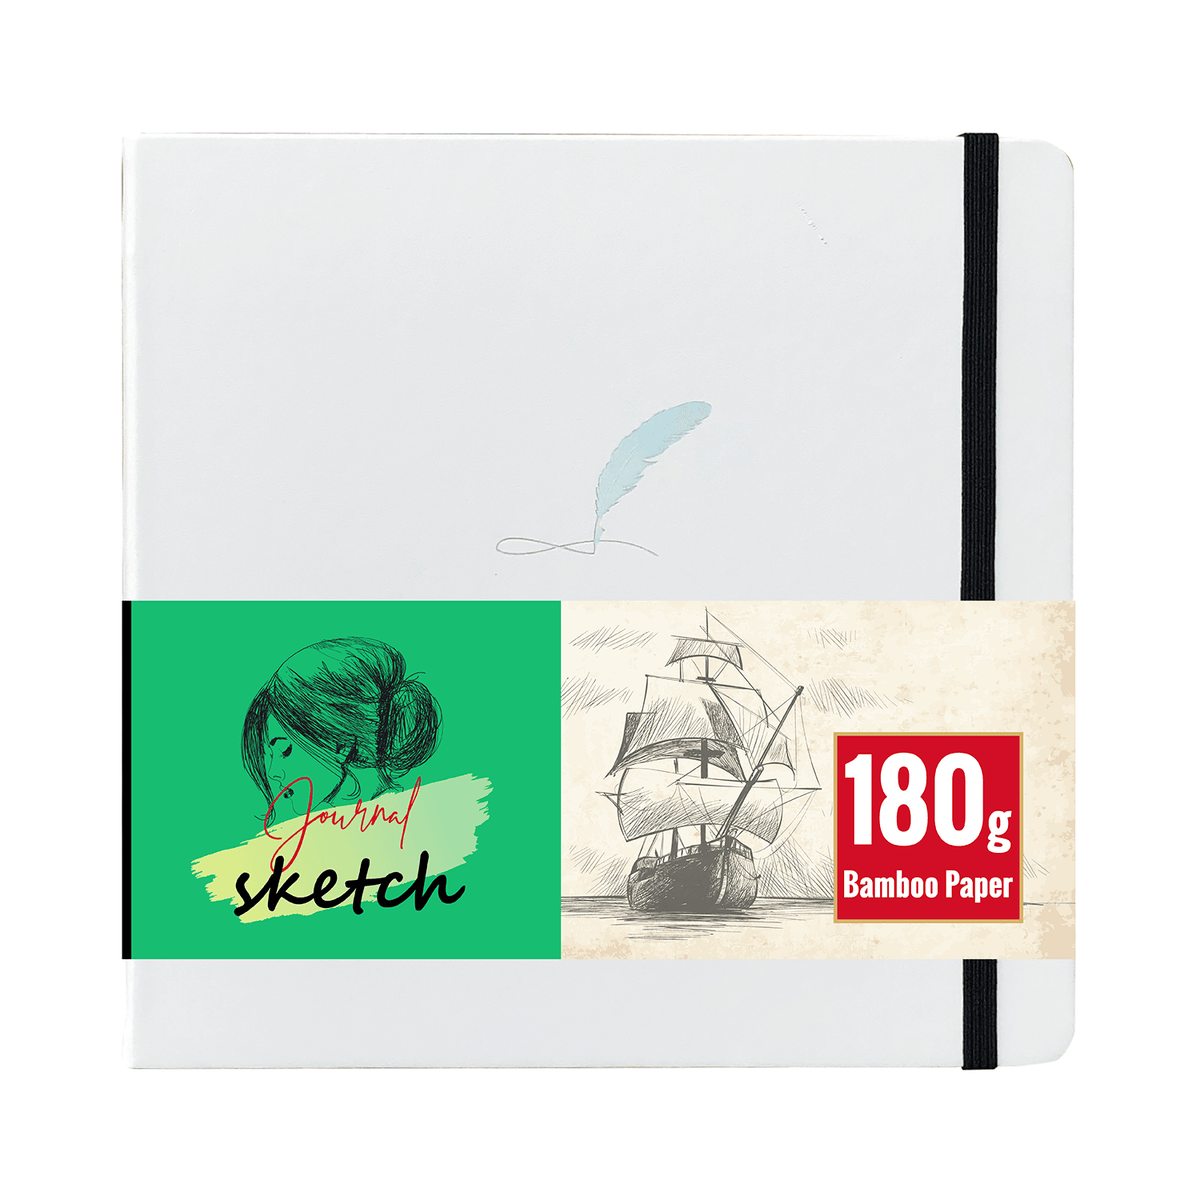 8X8 Square Hardcover SKetchbook Journal 180GSM Bamboo PAPER 128 Pages - Purple sage - bukenotebook